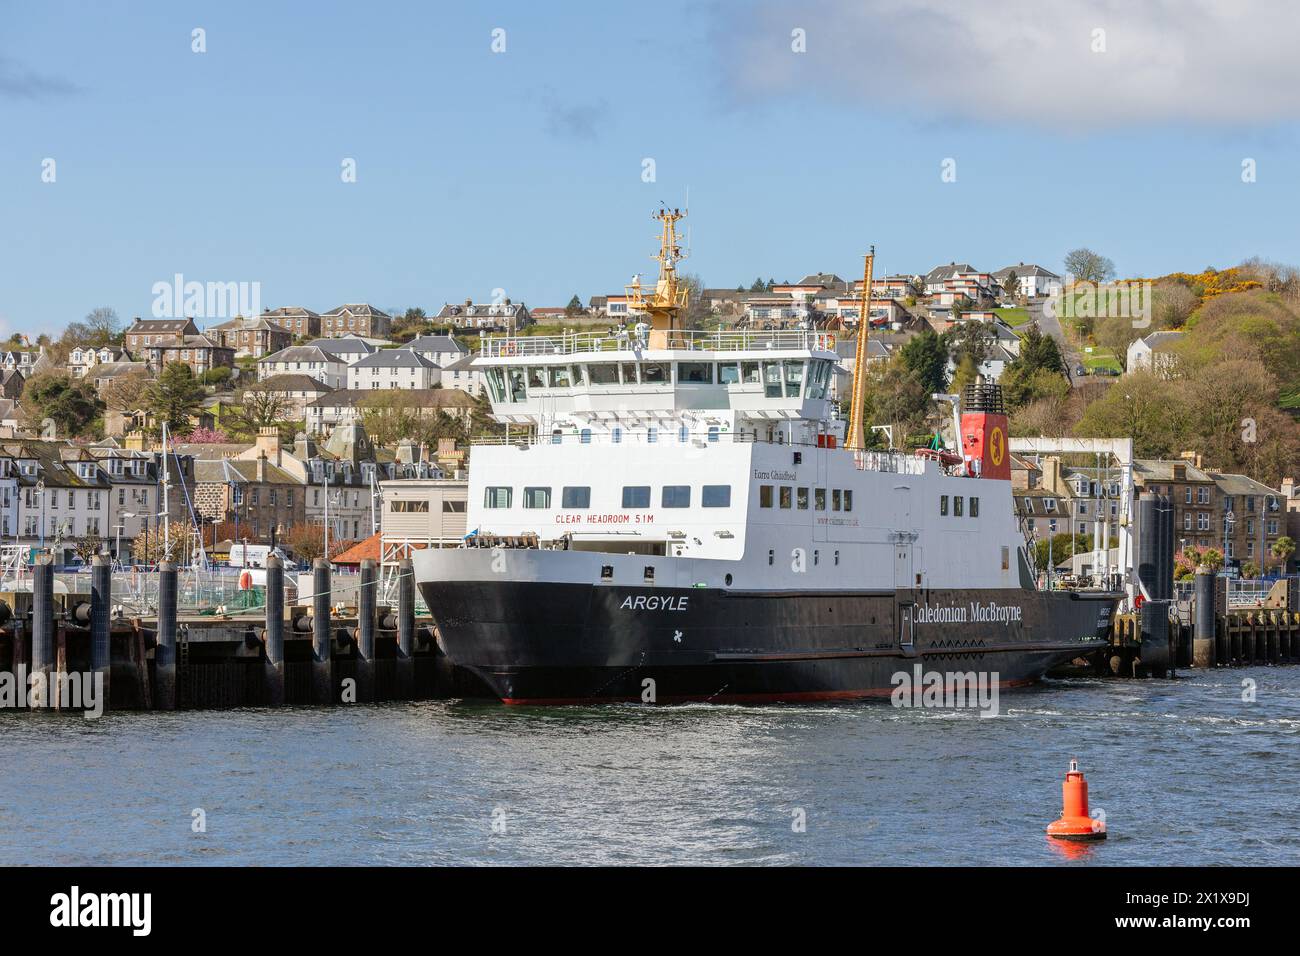 Caledonian MacBrayne MV Argyle berthed at Rothesay pier, Isle of Bute, Firth of Clyde, Scotland, UK Stock Photo